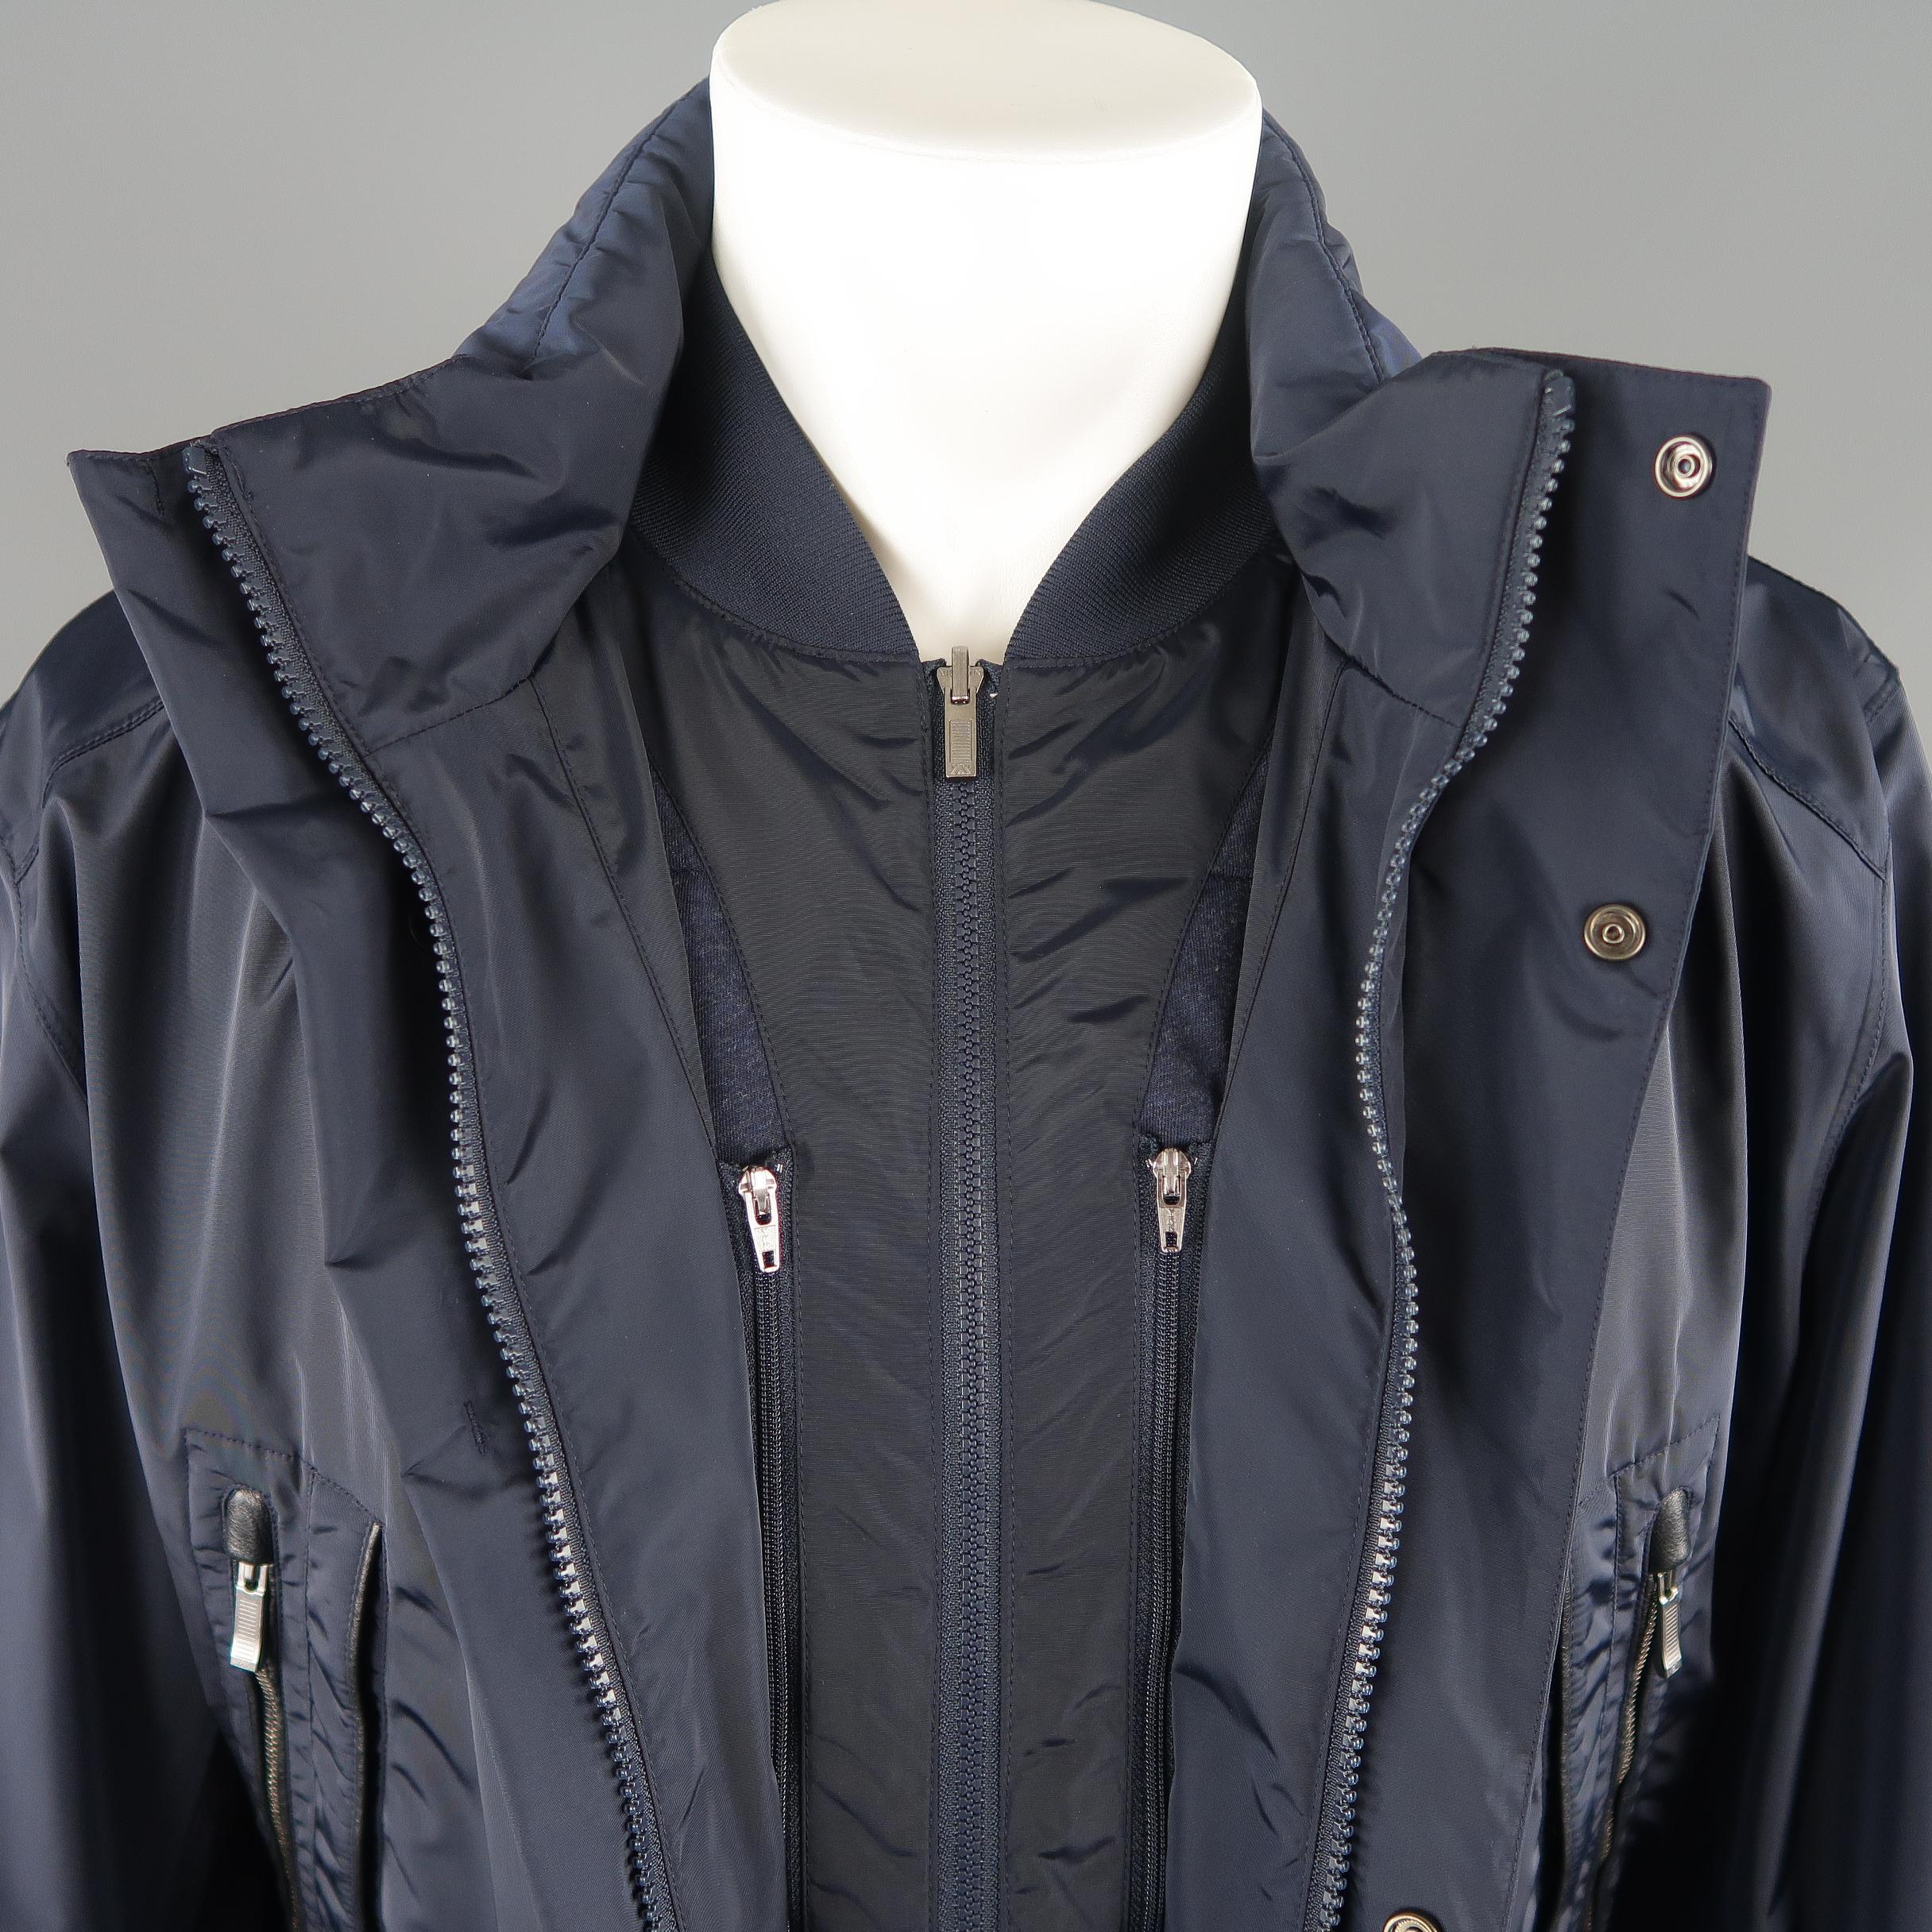 ZEGNA SPORT parka by ERMENEGILDO ZEGNA comes in navy polyamide blend with a drawstring waistband, zip front with snap placket, high collar with zip out hood, and internal zip vest layer.
 
Excellent Pre-Owned Condition.
Marked: XL
 
Measurements:
